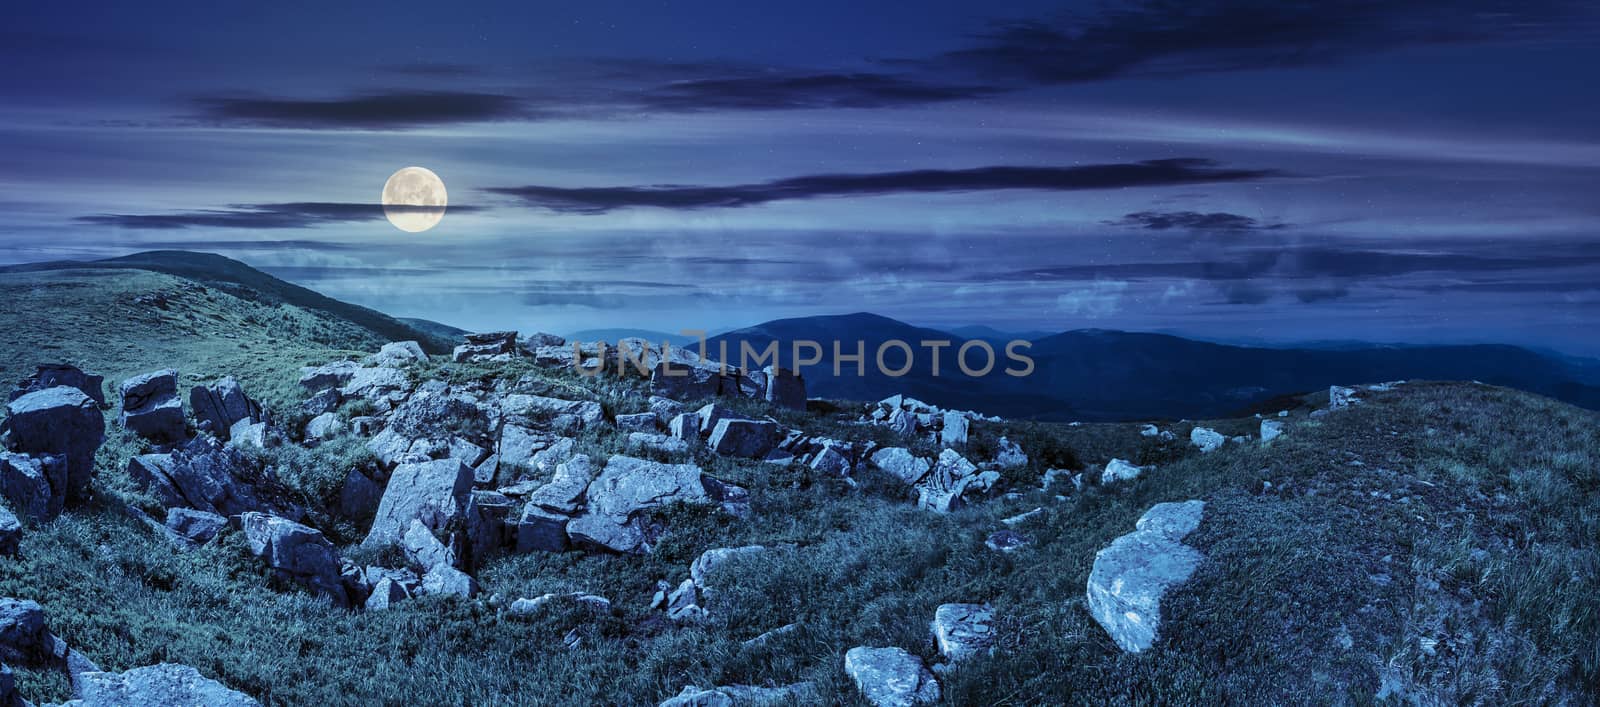 stones in valley on top of mountain range at night by Pellinni